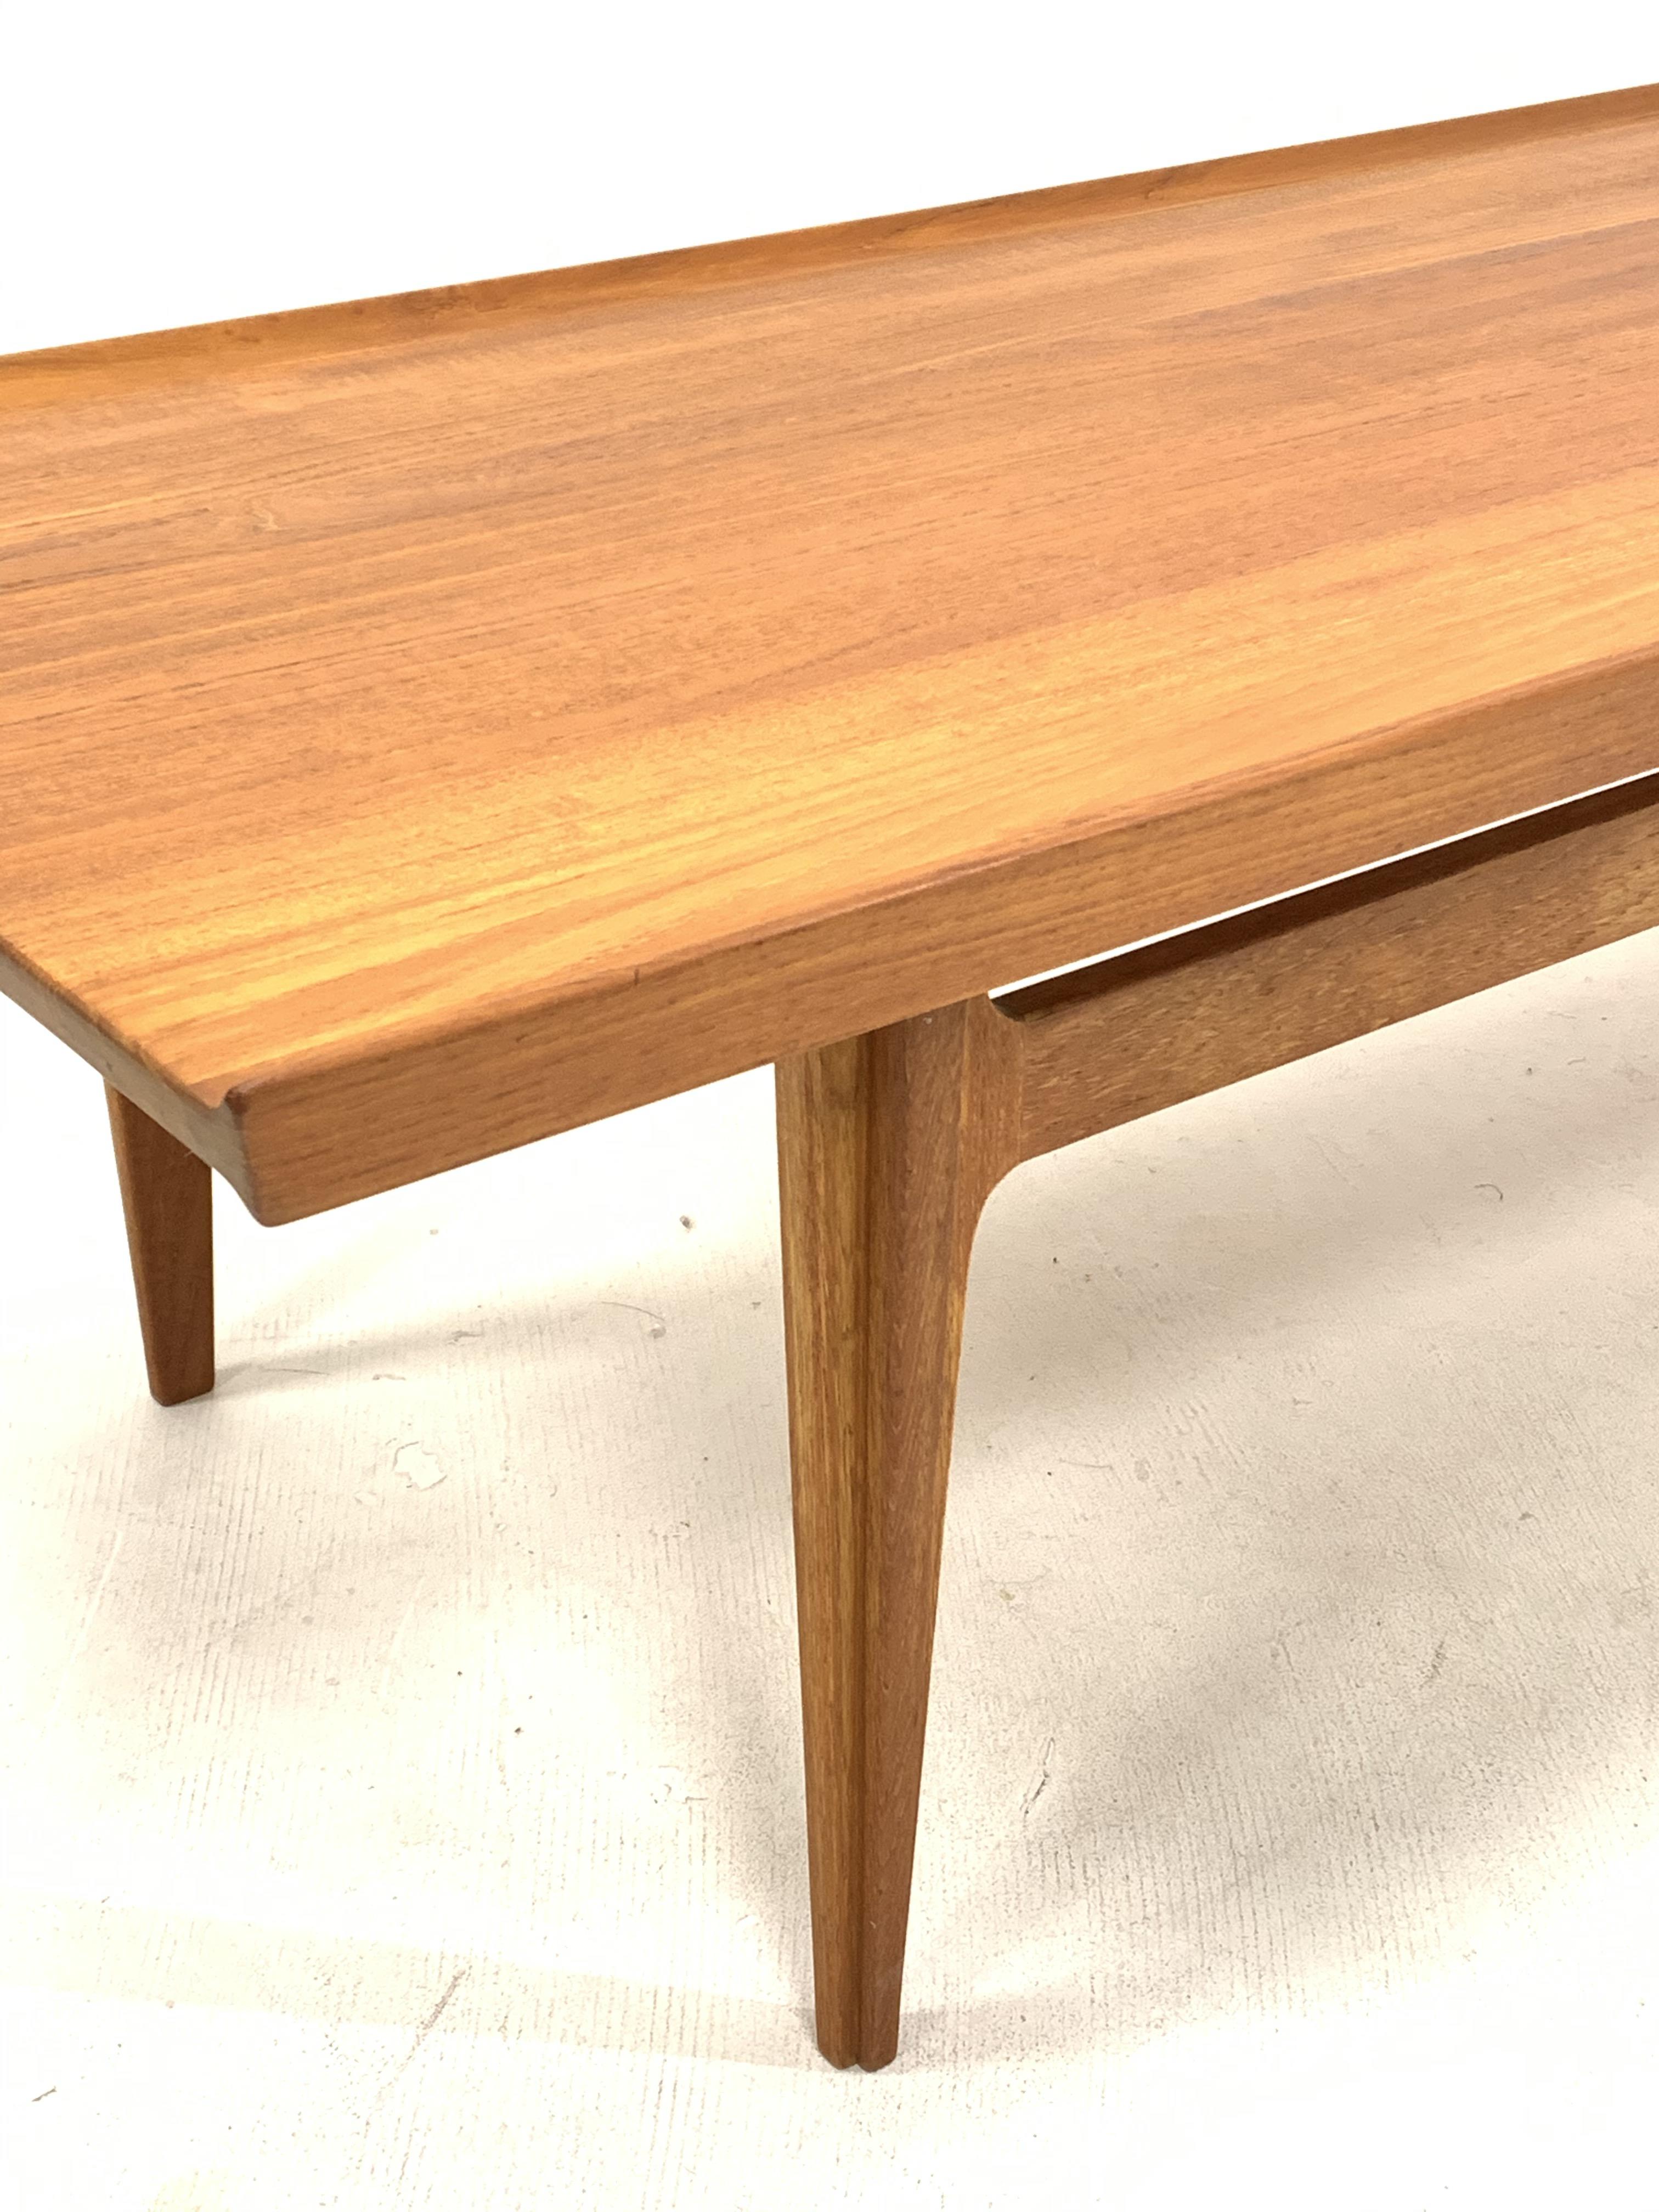 Finn Juhl for France & Sons - Rare early 'model. 532' solid teak coffee table, outer facing ridge - Image 2 of 7